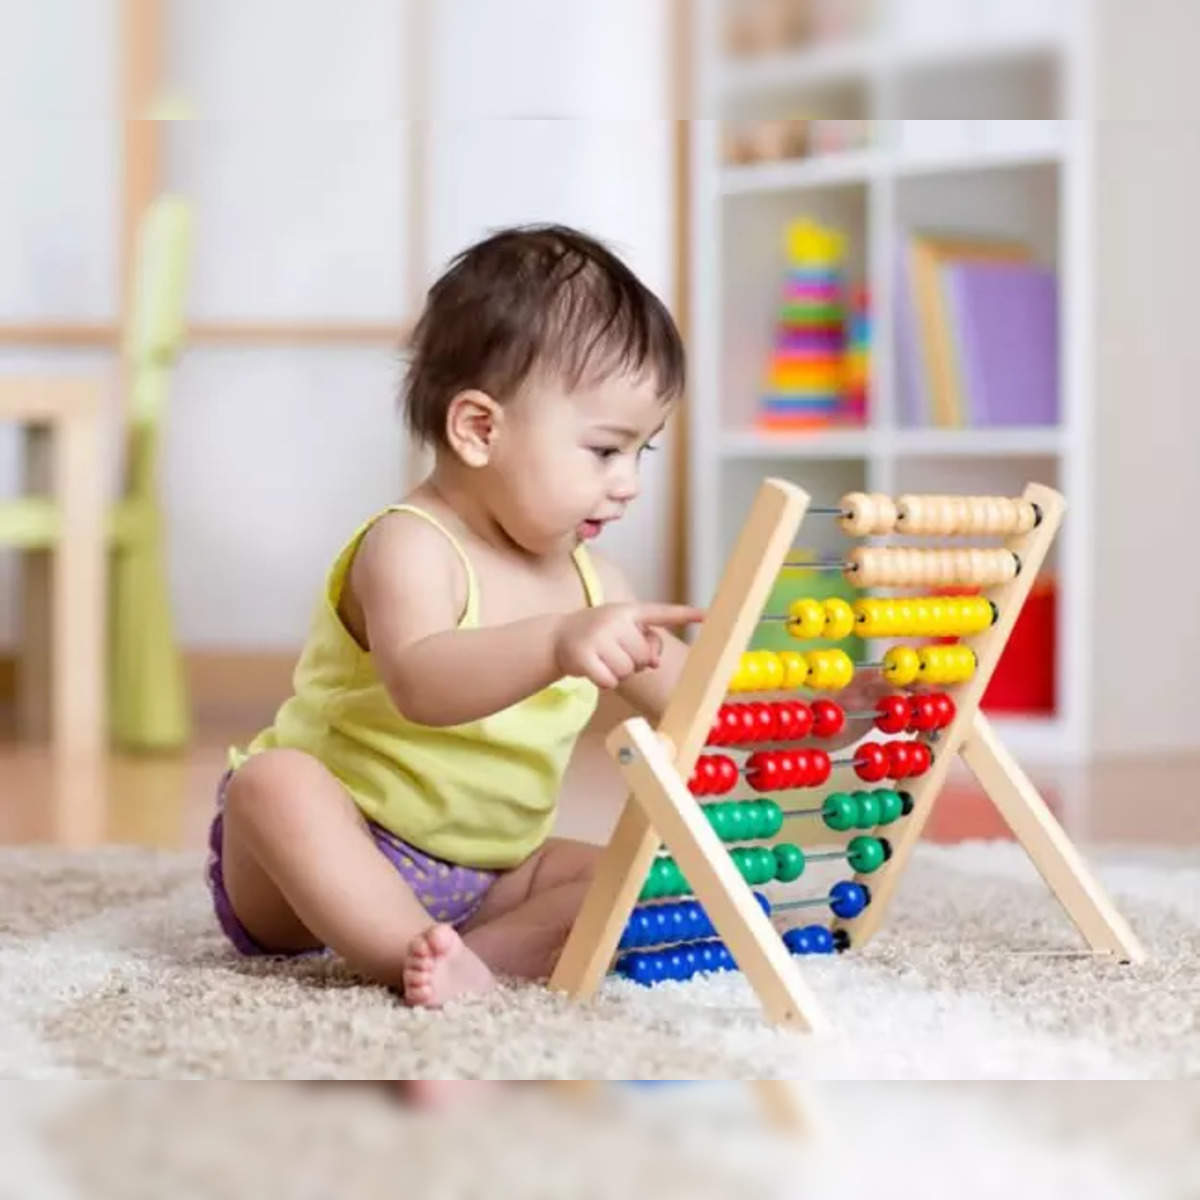 Best Educational Toys For Kids In India